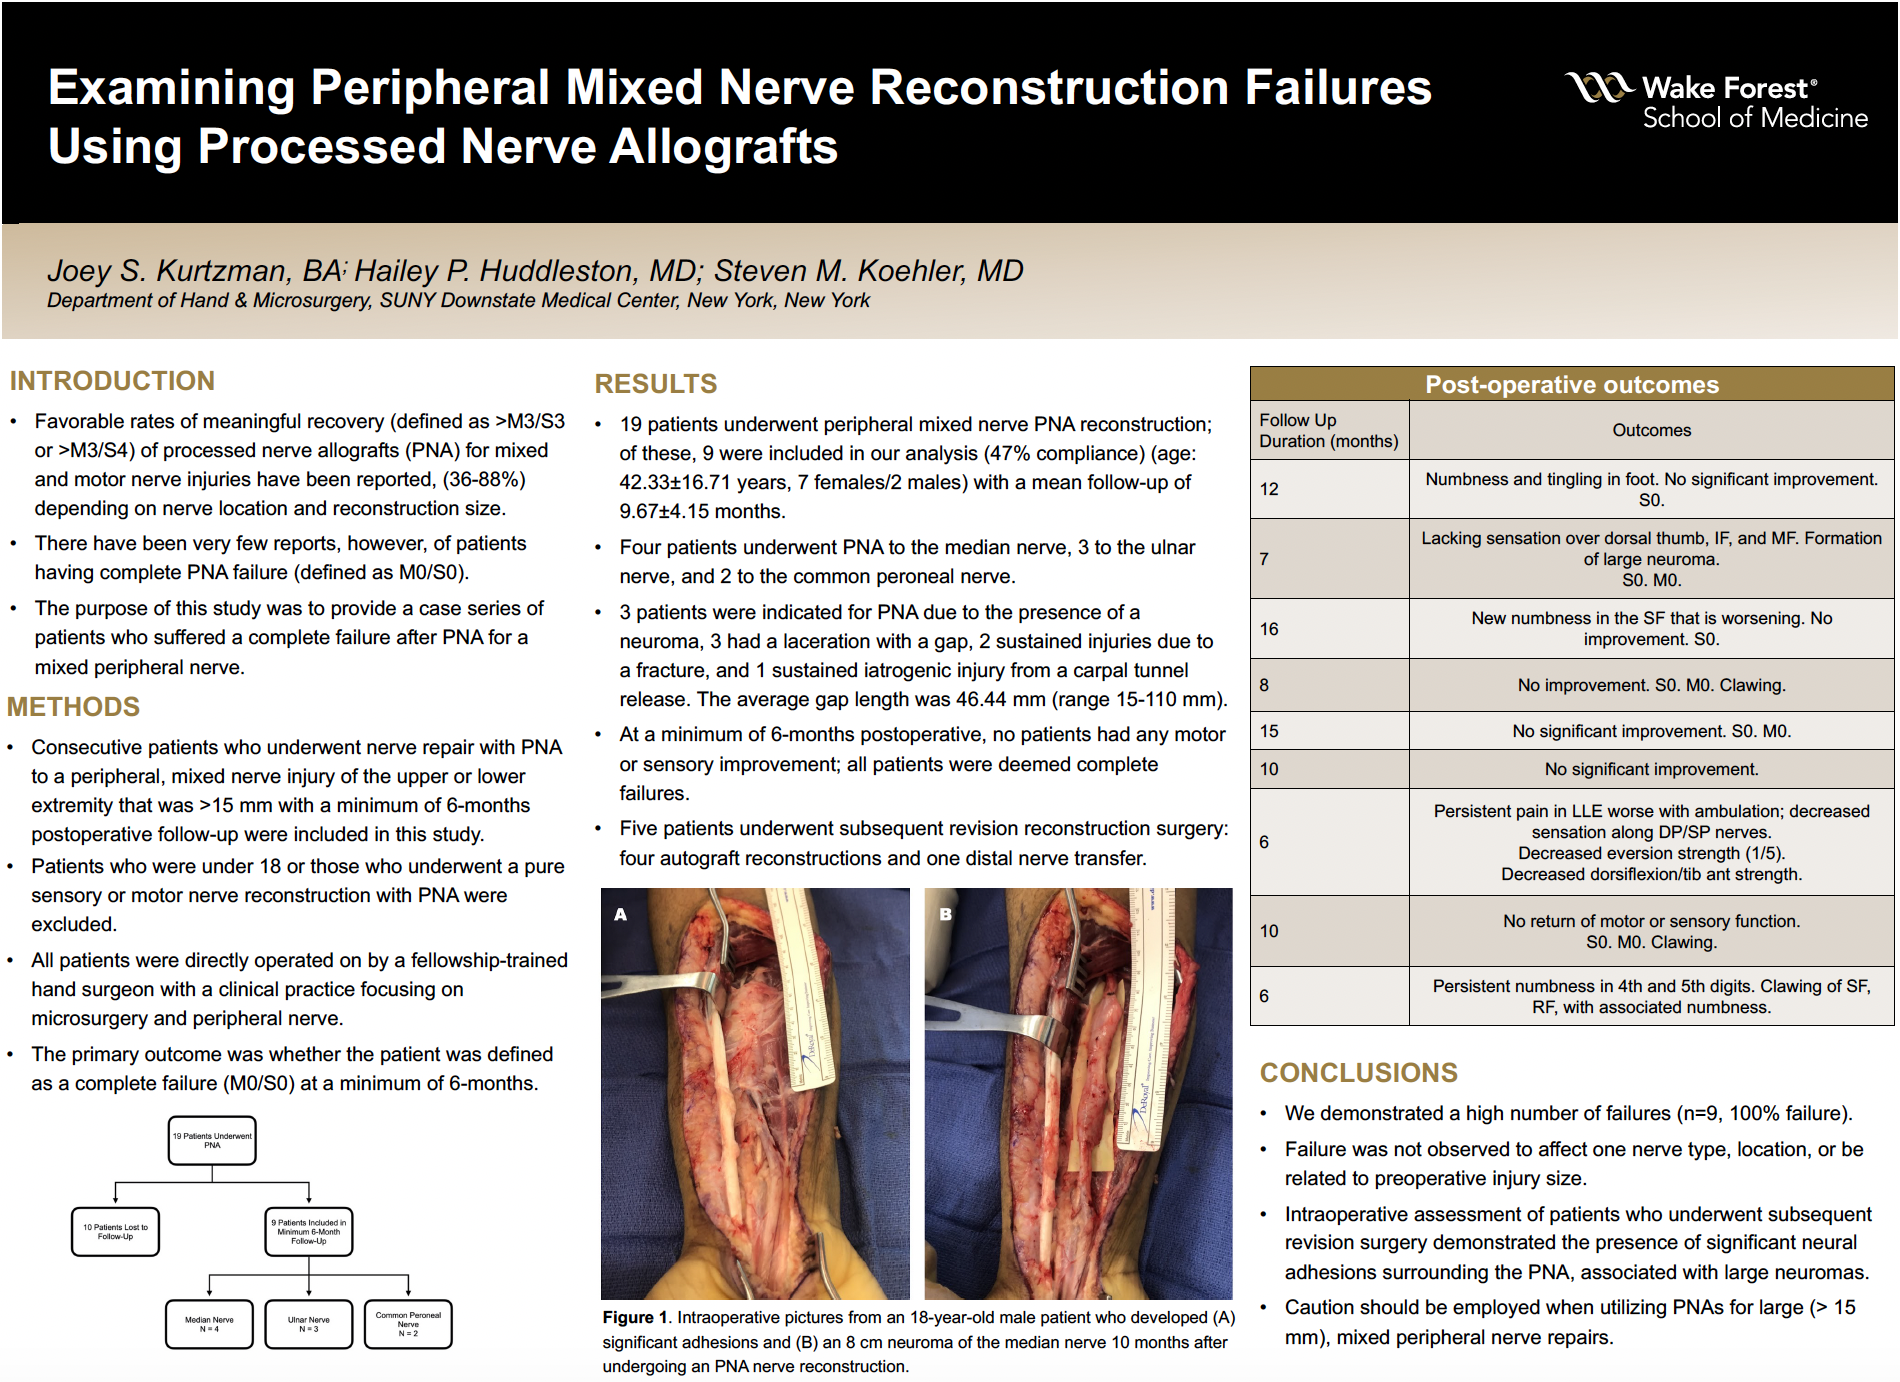 Showcase Image for Examining Peripheral Mixed Nerve Reconstruction Failures Using Processed Nerve Allografts 